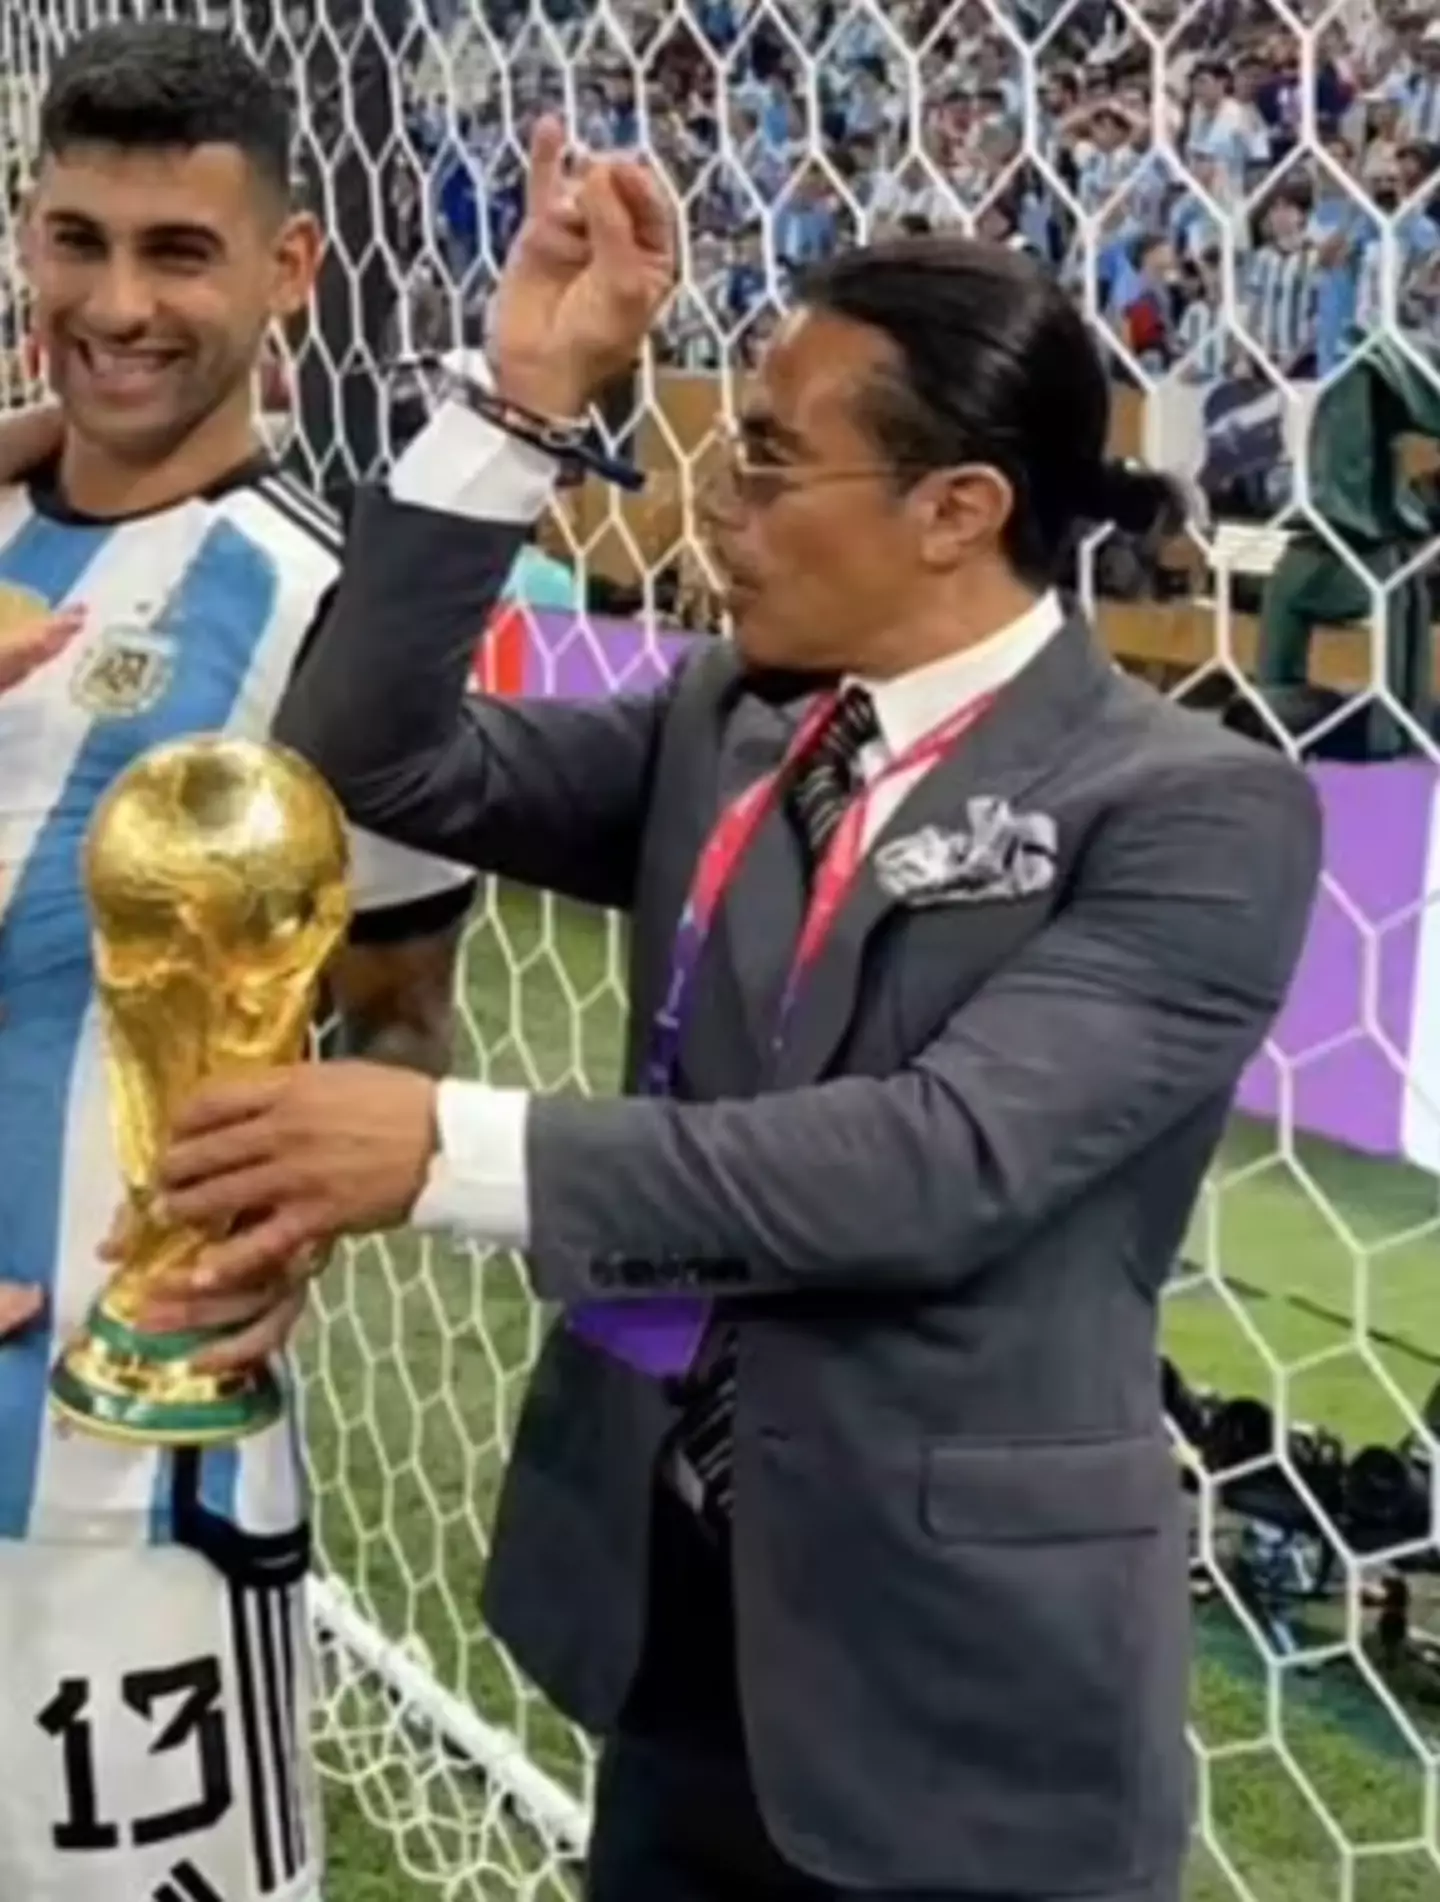 Salt Bae broke FIFA rules with the World Cup.